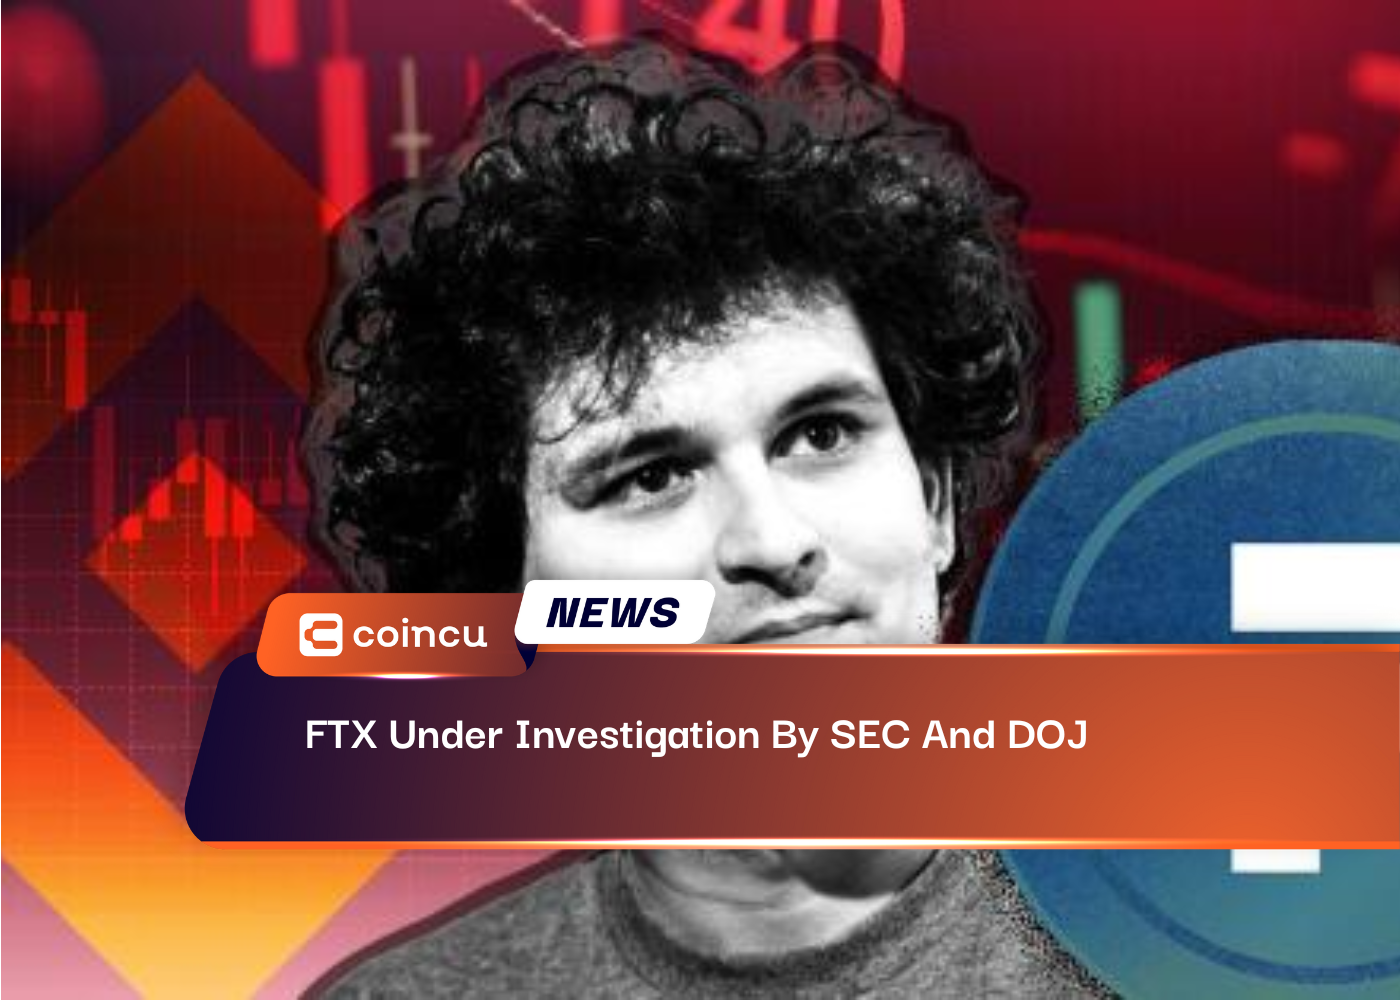 FTX Under Investigation By SEC And DOJ